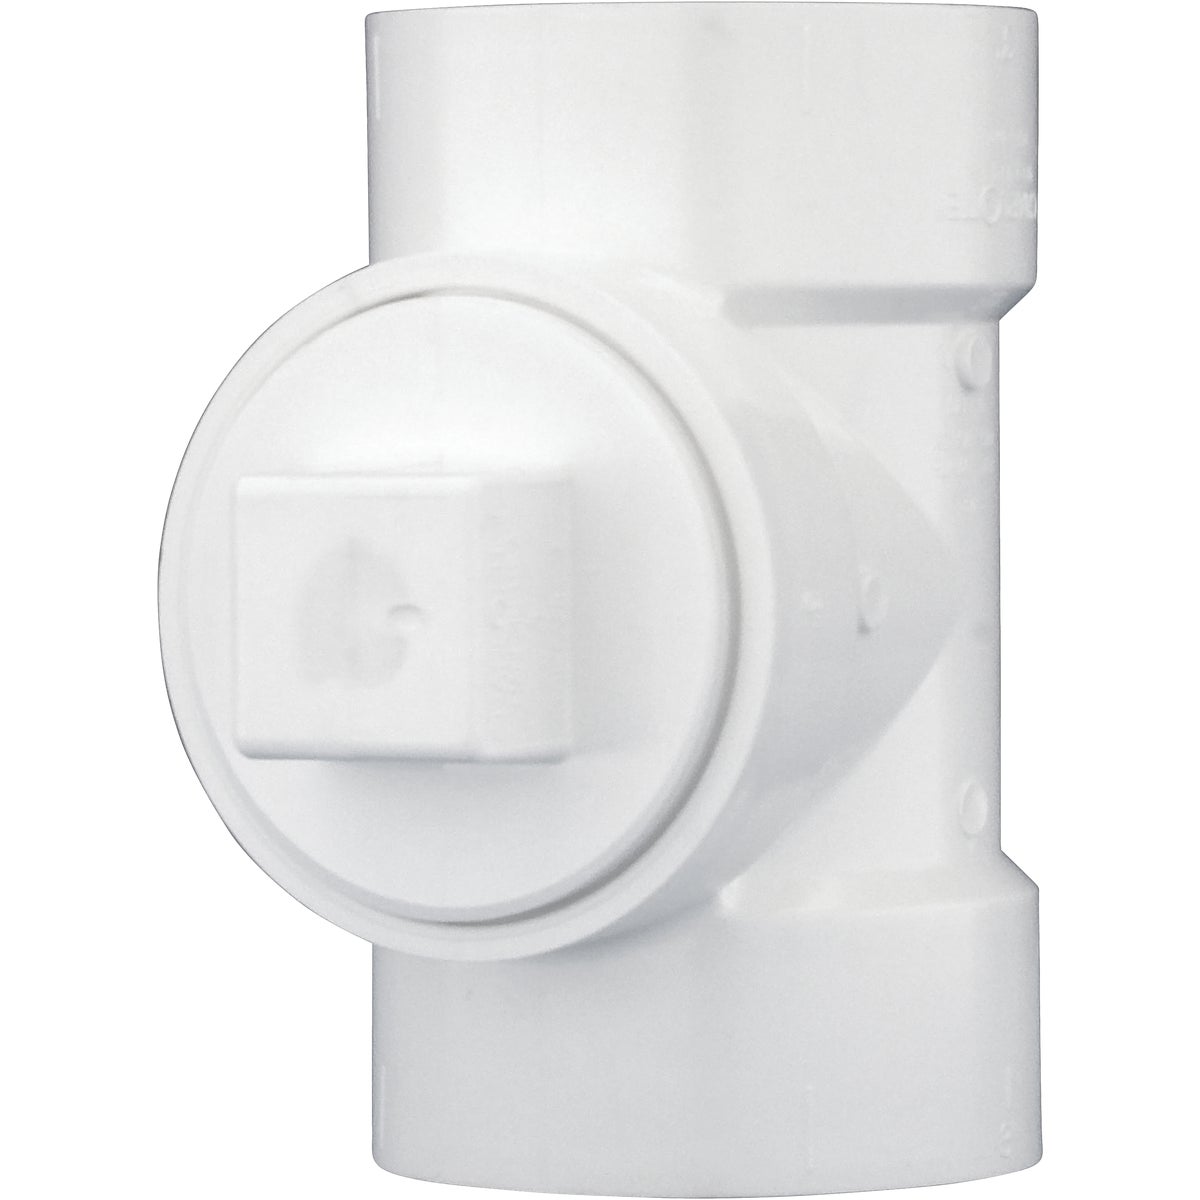 Charlotte Pipe 3 In. Test PVC Tee with Toe Saver Plug